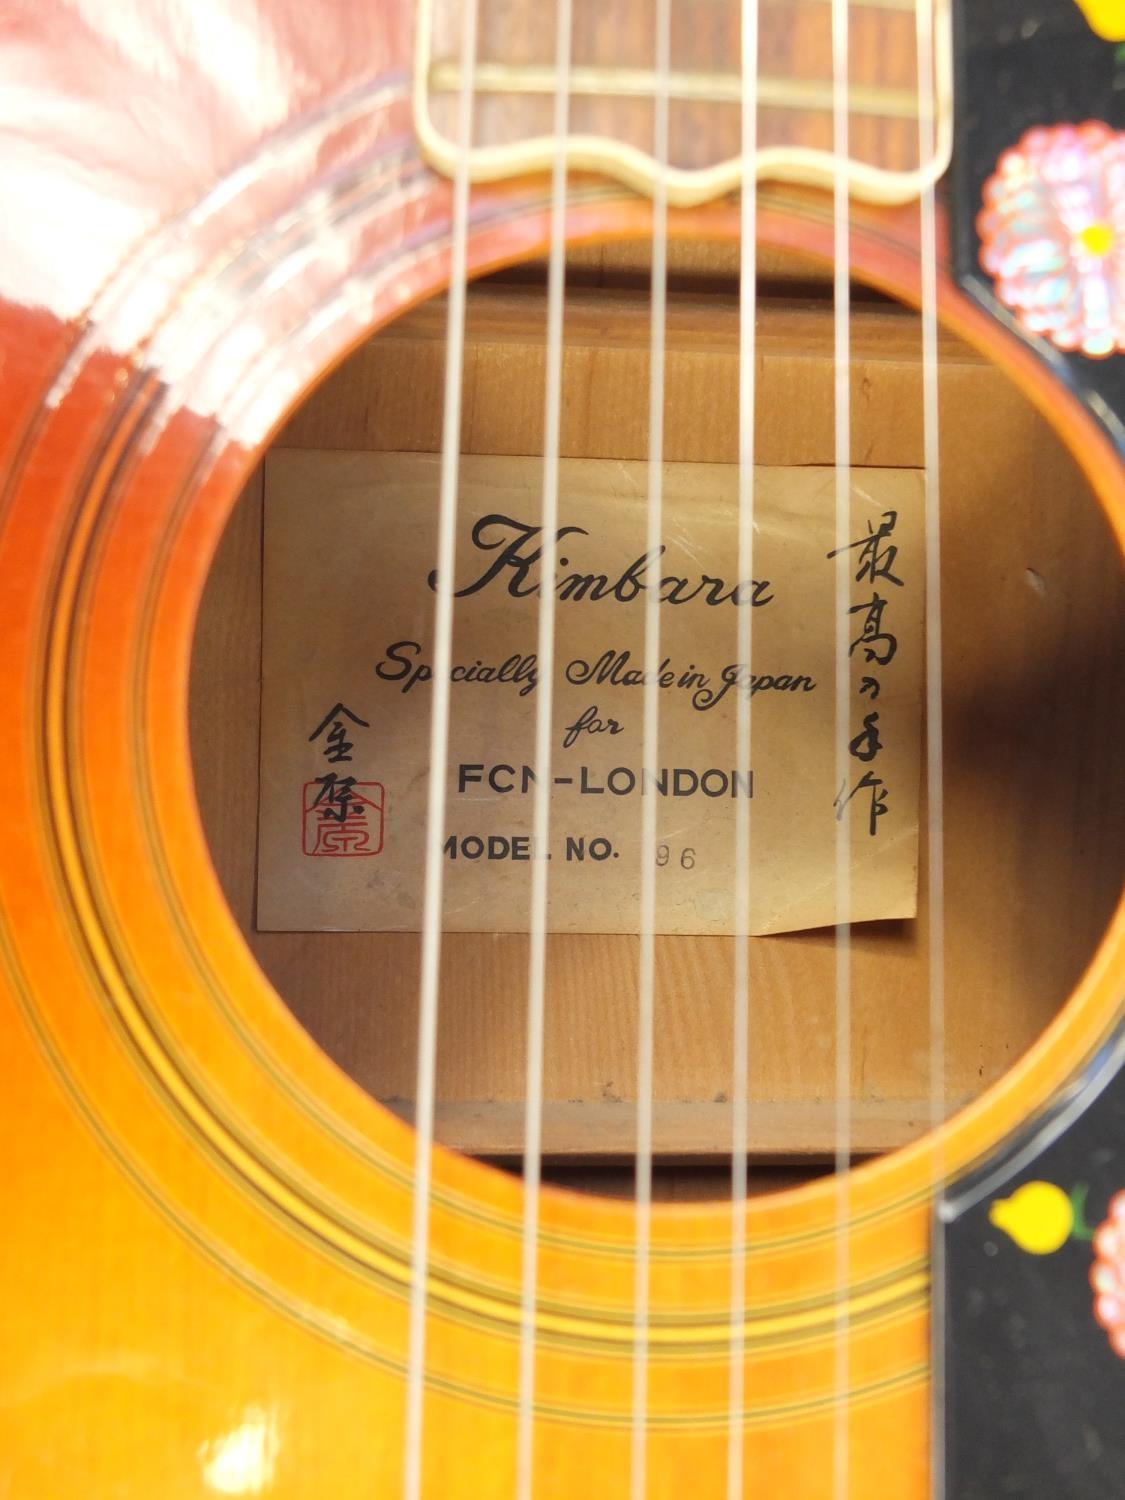 Kambara six string custom acoustic guitar with fitted travelling case, model number 86, 107cm in - Image 9 of 11